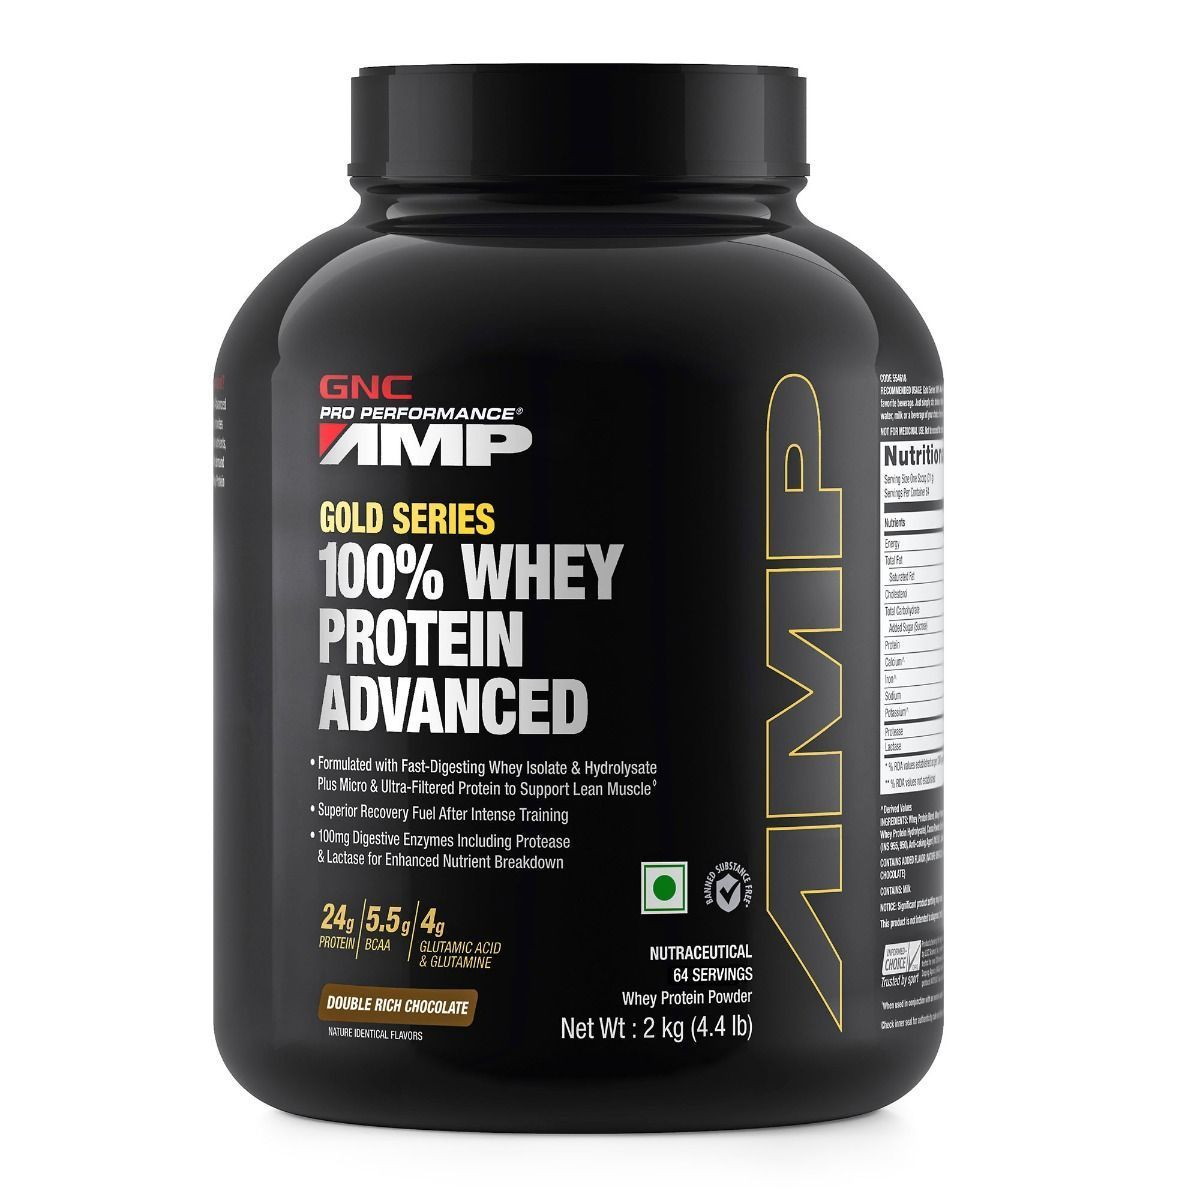 https://choice.wetestyoutrust.com/sites/default/files/styles/original/public/2021-06/GNC%20-%20Amplified%20Gold%20100%25%20Whey%20Protein%20Advanced%20%28India%29-1.png?itok=zodkfCqN